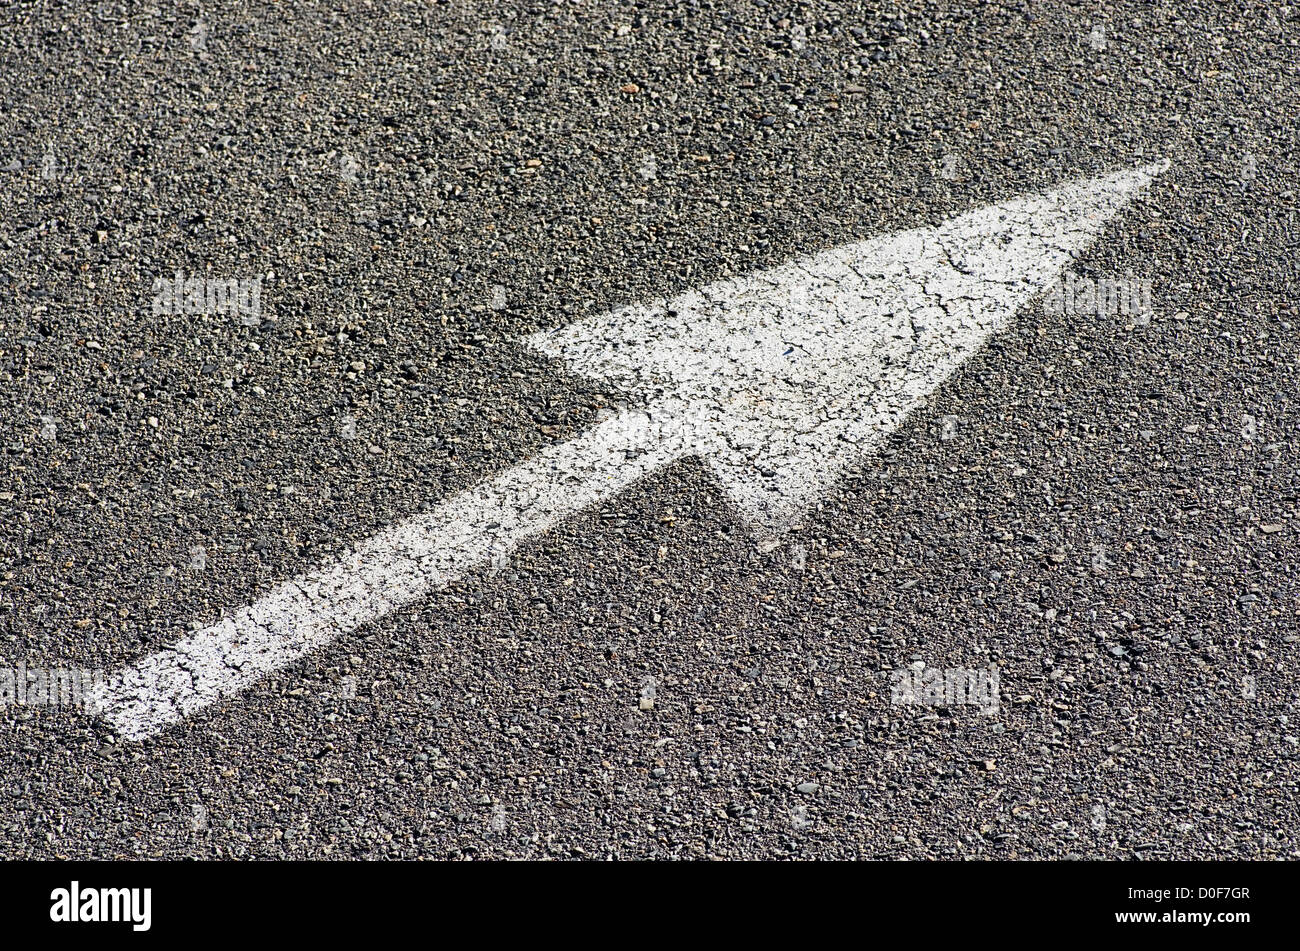 white arrow on gray asphalt pavement pointing up to the right Stock Photo